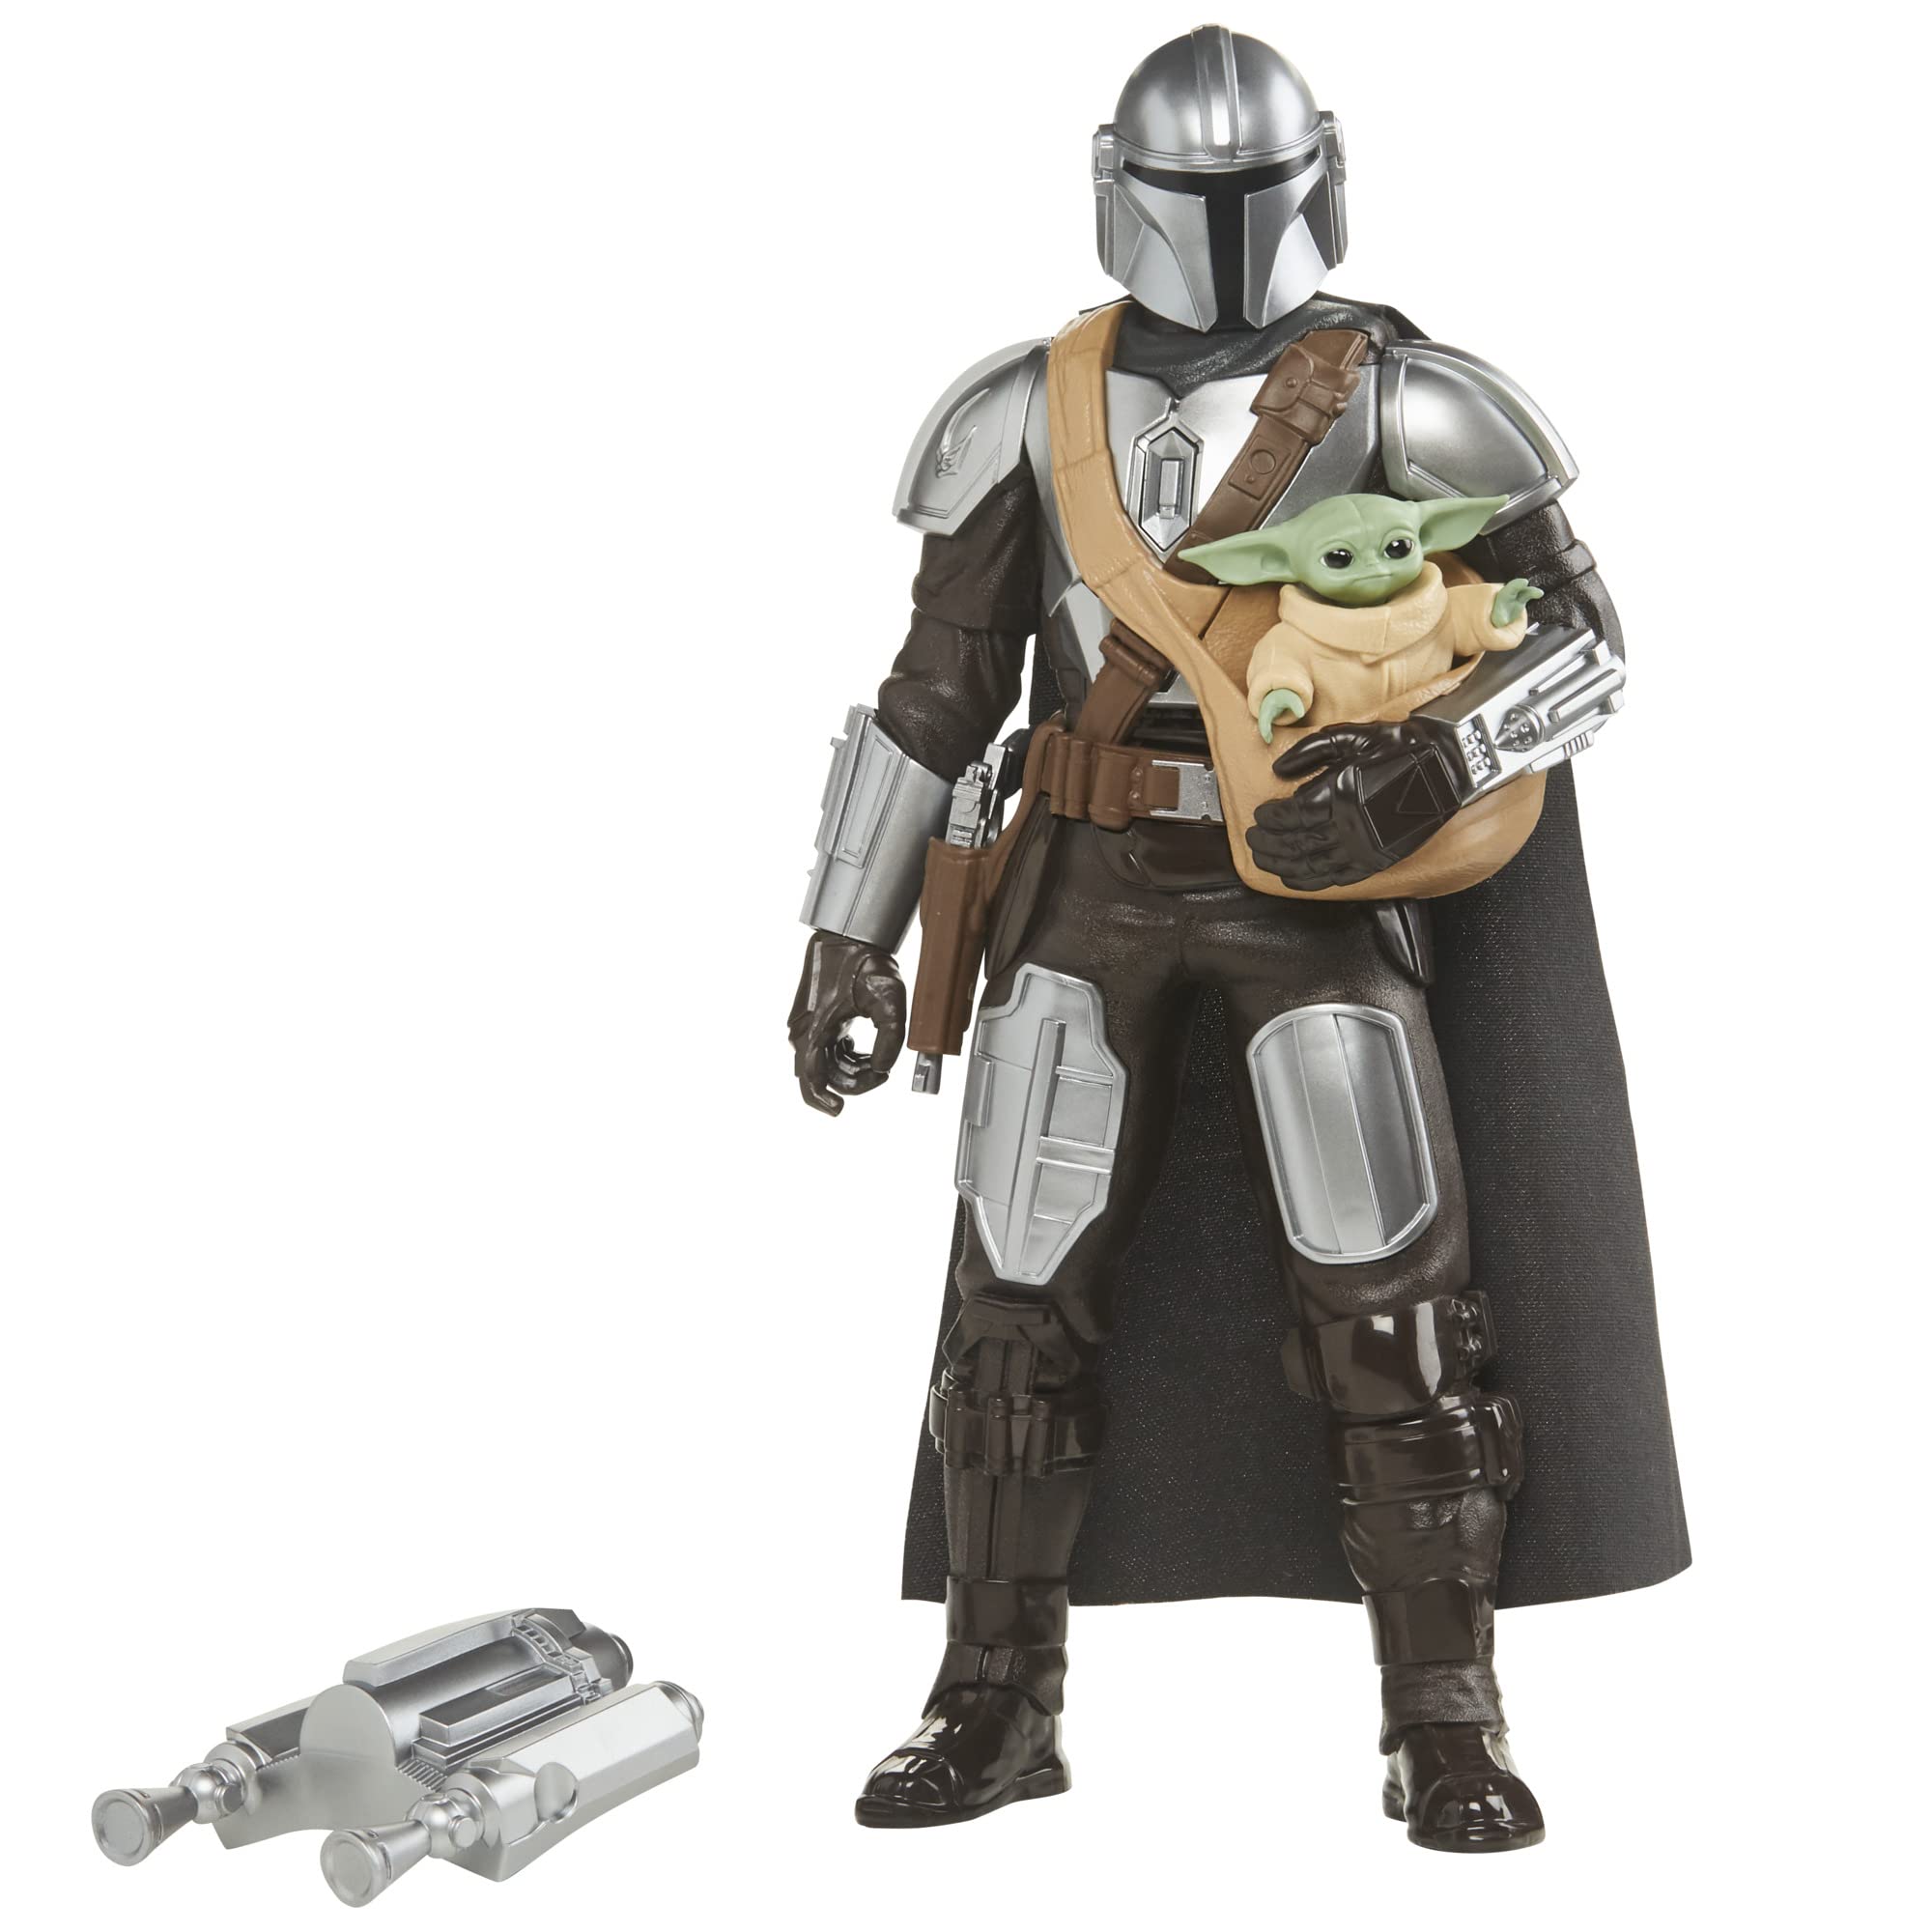 Star Wars Galactic Action The Mandalorian & Grogu Interactive Electronic 12-Inch-Scale Action Figures, Toys for Kids Ages 4 and Up